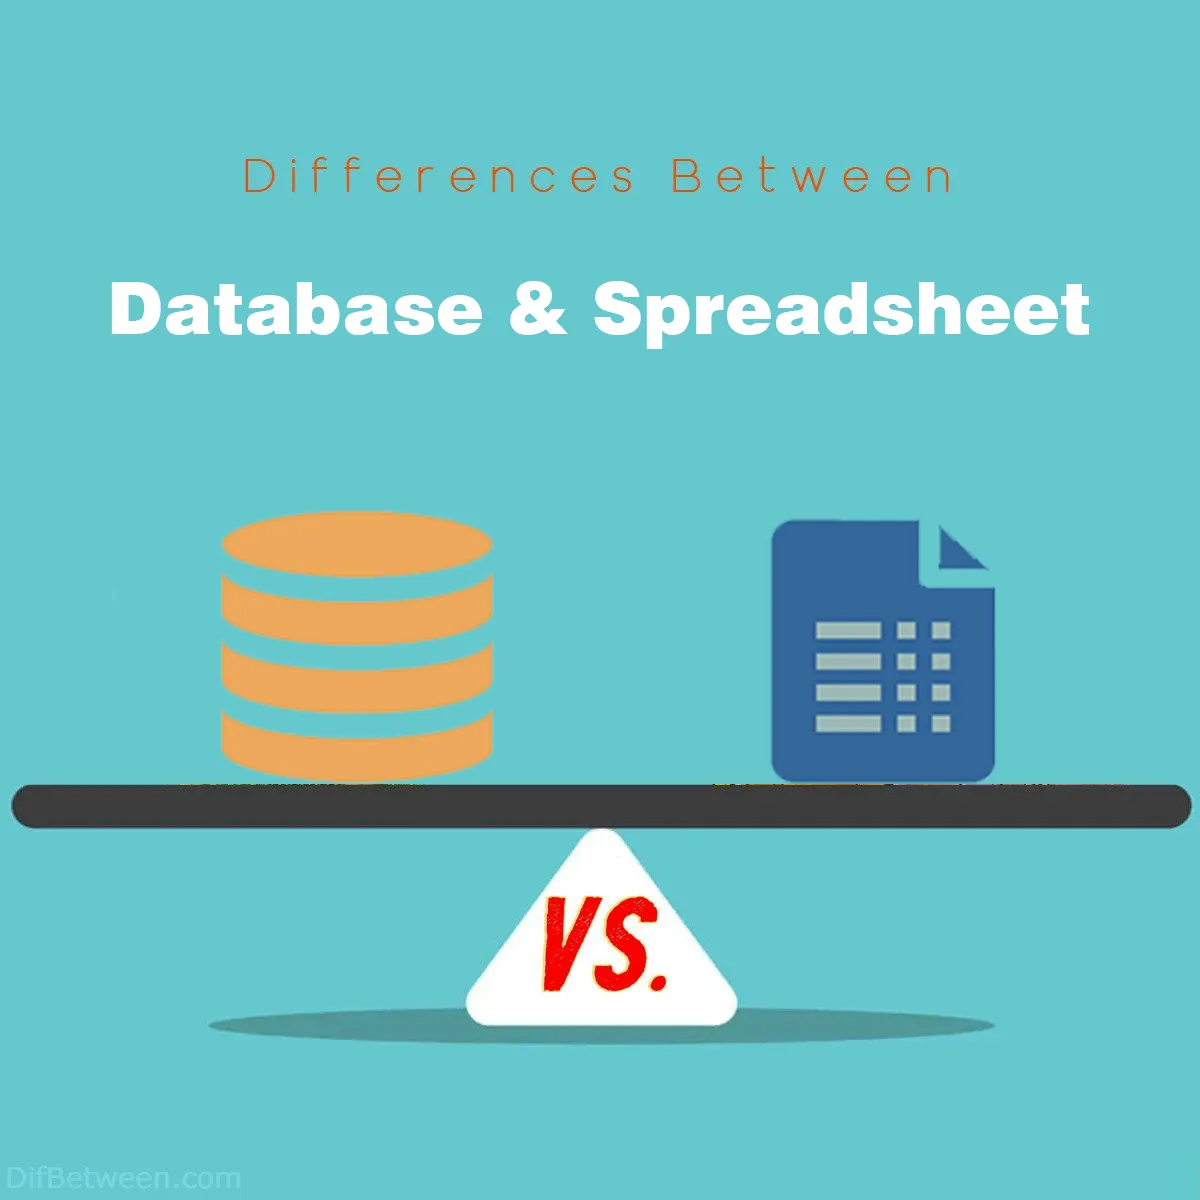 Differences Between Database and Spreadsheet